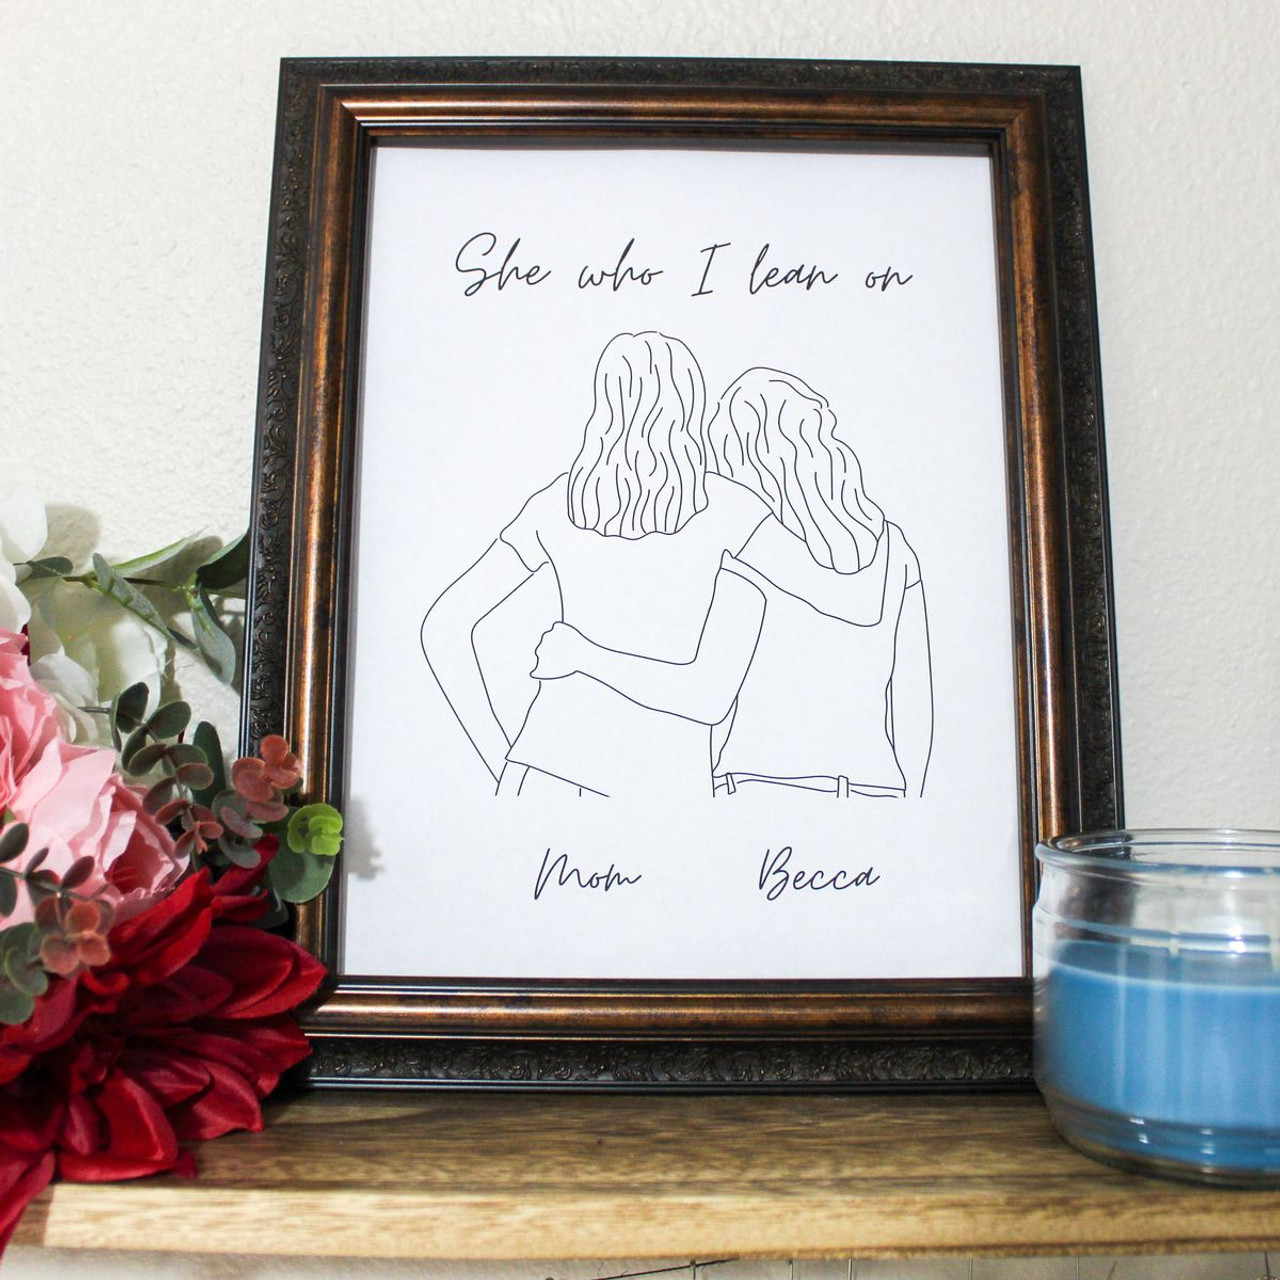 Personalized 'She Who I Lean on' Print product image